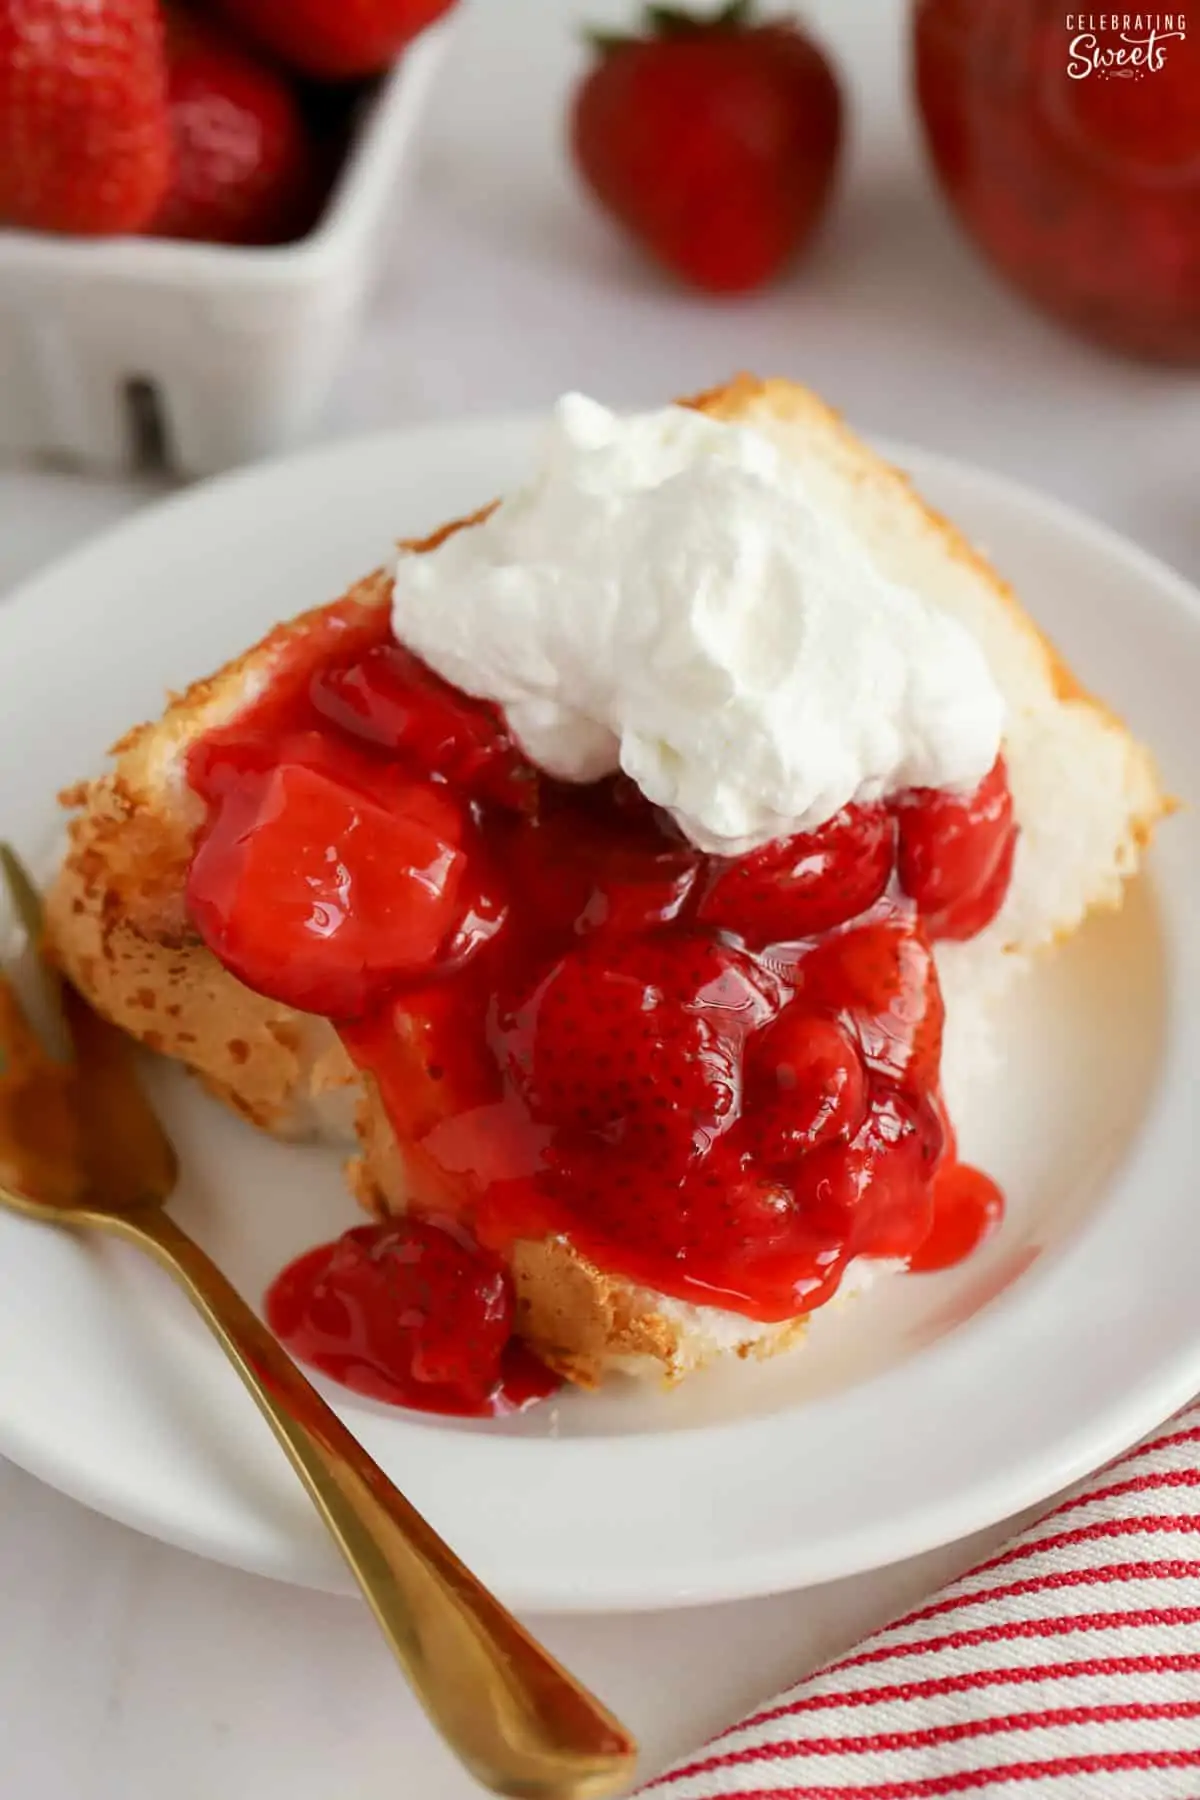 Strawberry sauce and whipped cream on a slice of angel food cake.